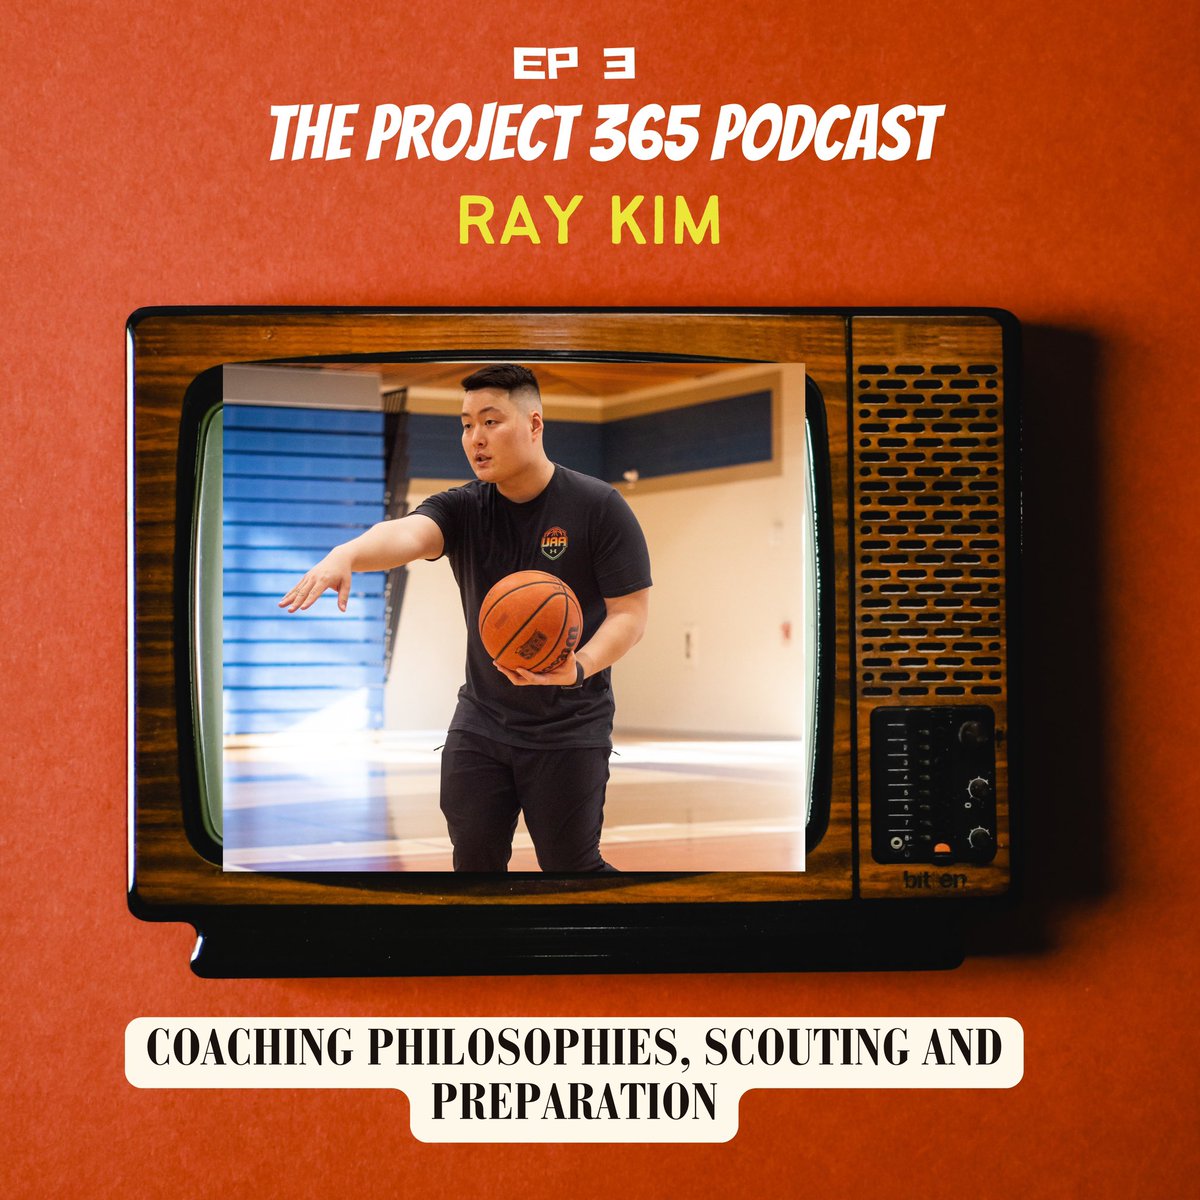 Excited to have @CoachRayKim to the podcast!! A really good discussion about coaching philosophies, scouting and player development!

Podcast link: anchor.fm/coacho365/epis…

Youtube:youtu.be/6pFaB7dmumg